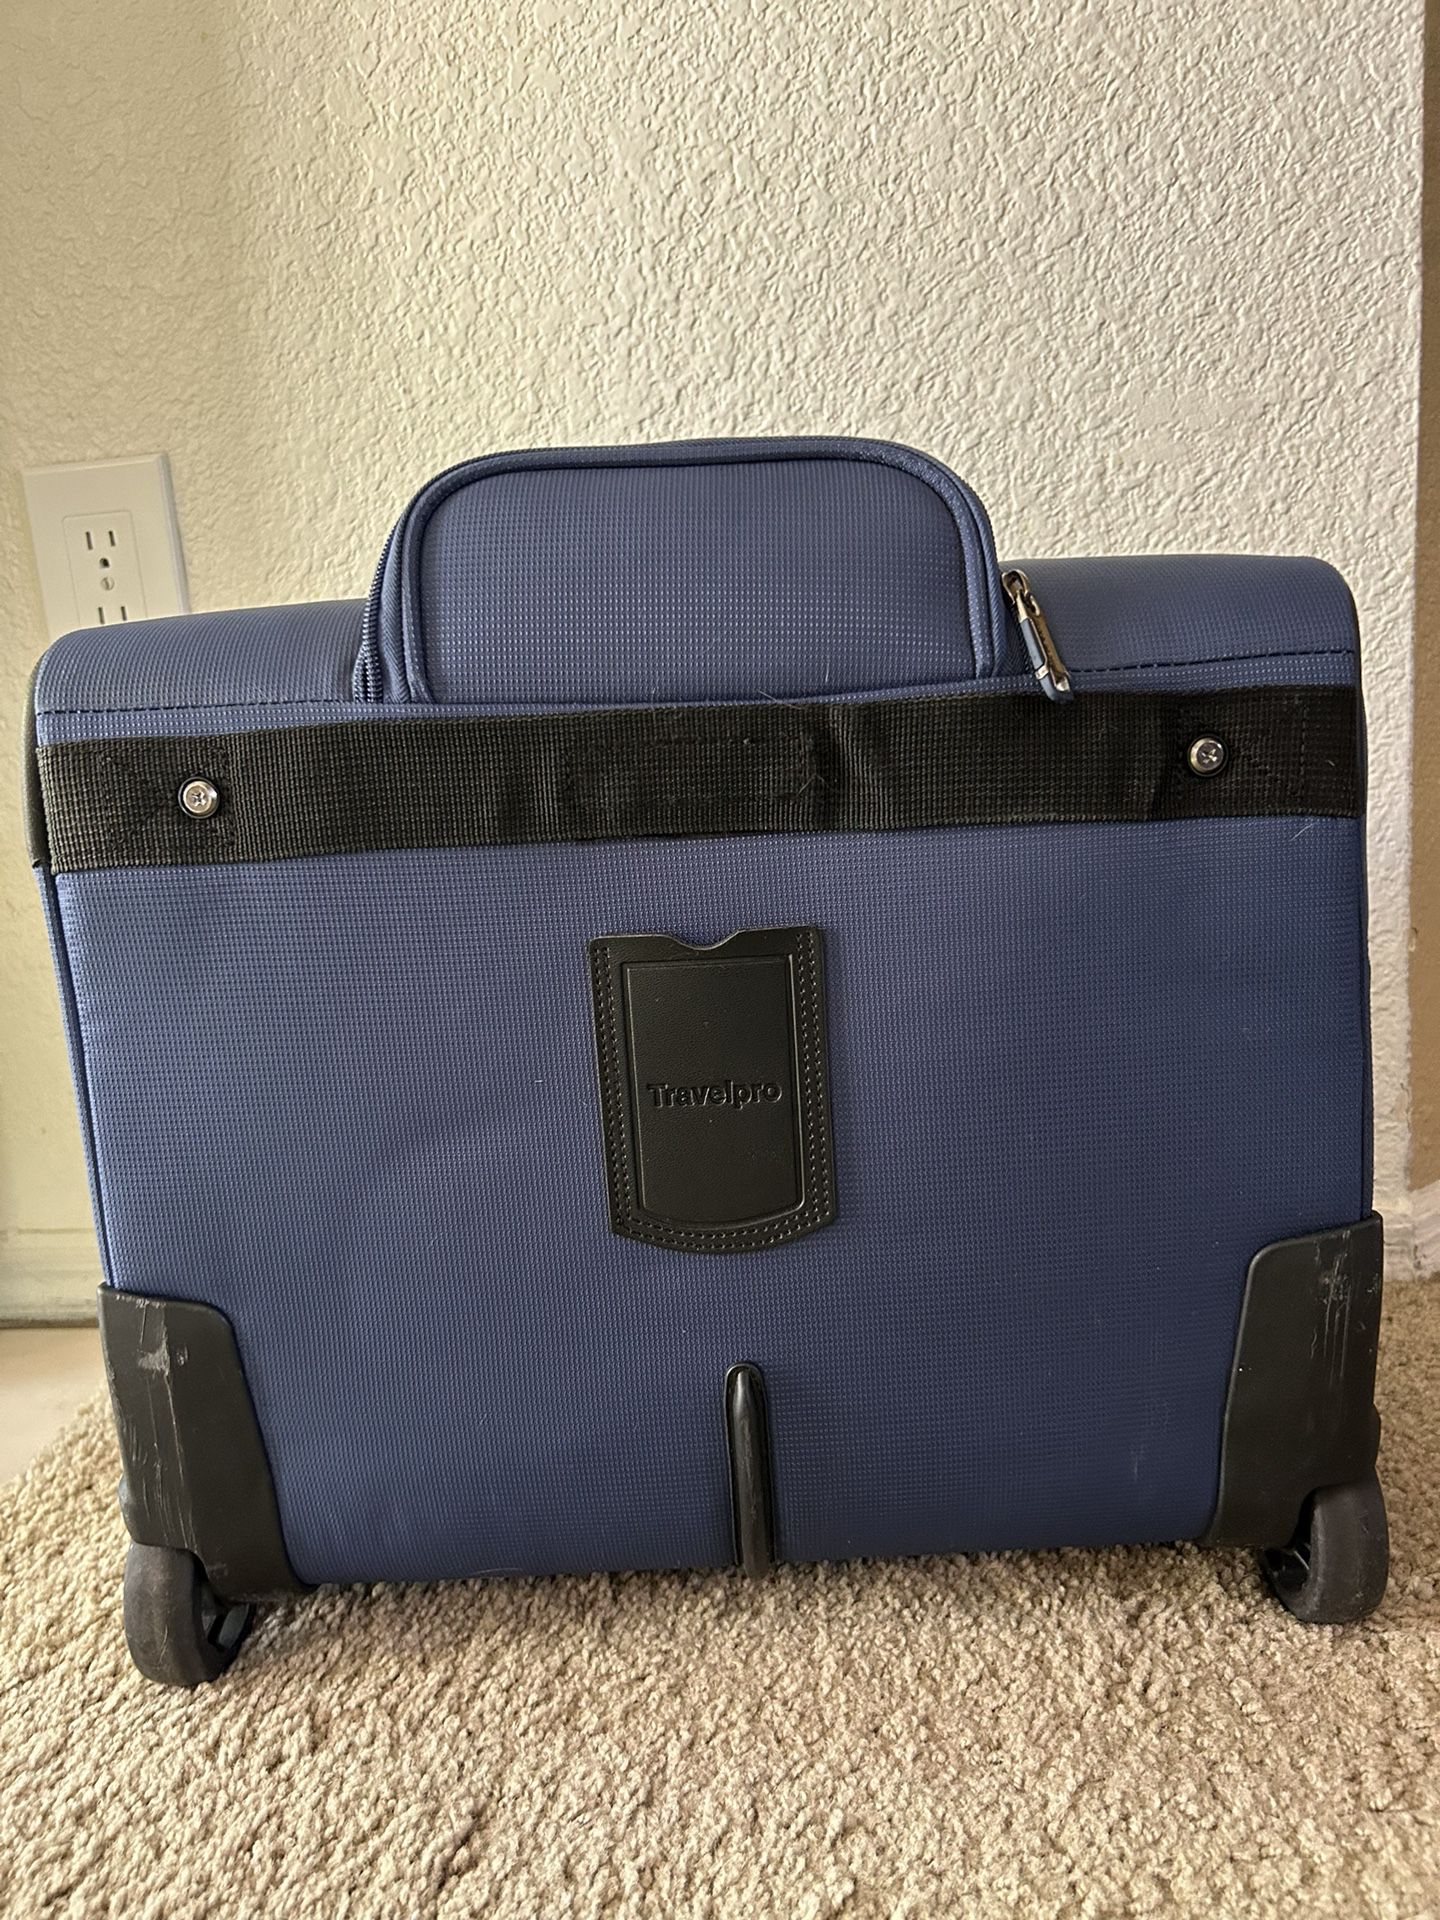 TravelPro Rolling MaxLite Carryon Size Suitcases; $50 For 1 Or Both For $75